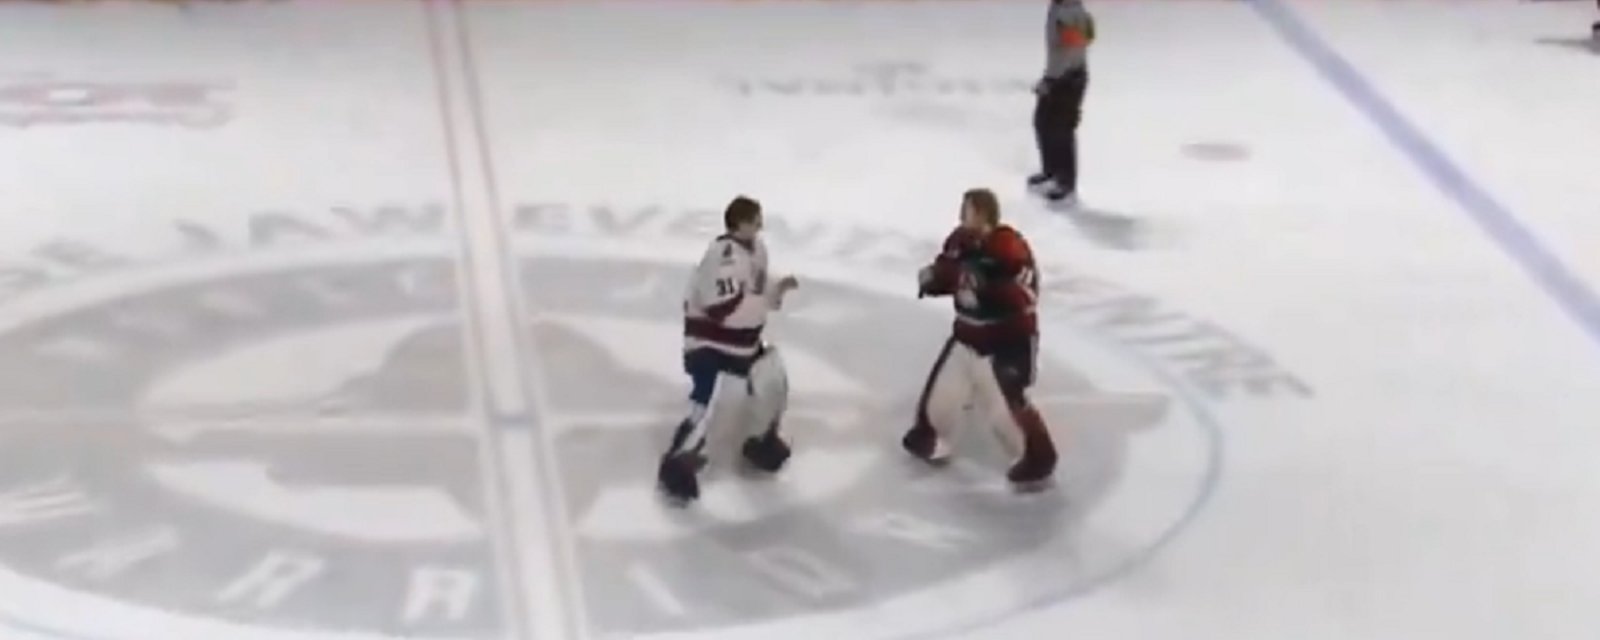 Goalie fight at center ice after all hell breaks loose.